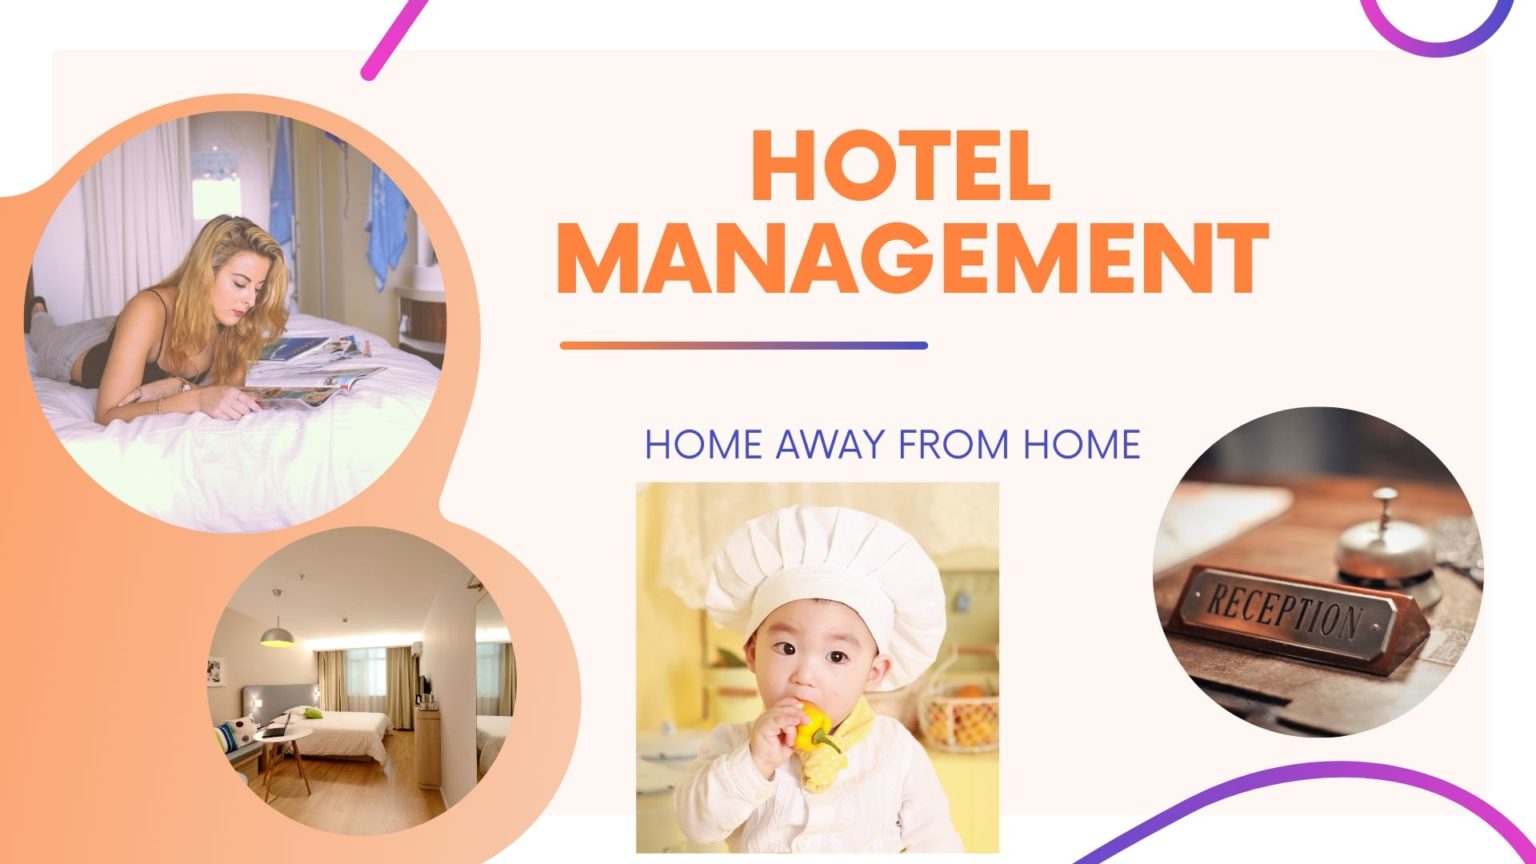 research topics related to hotel management